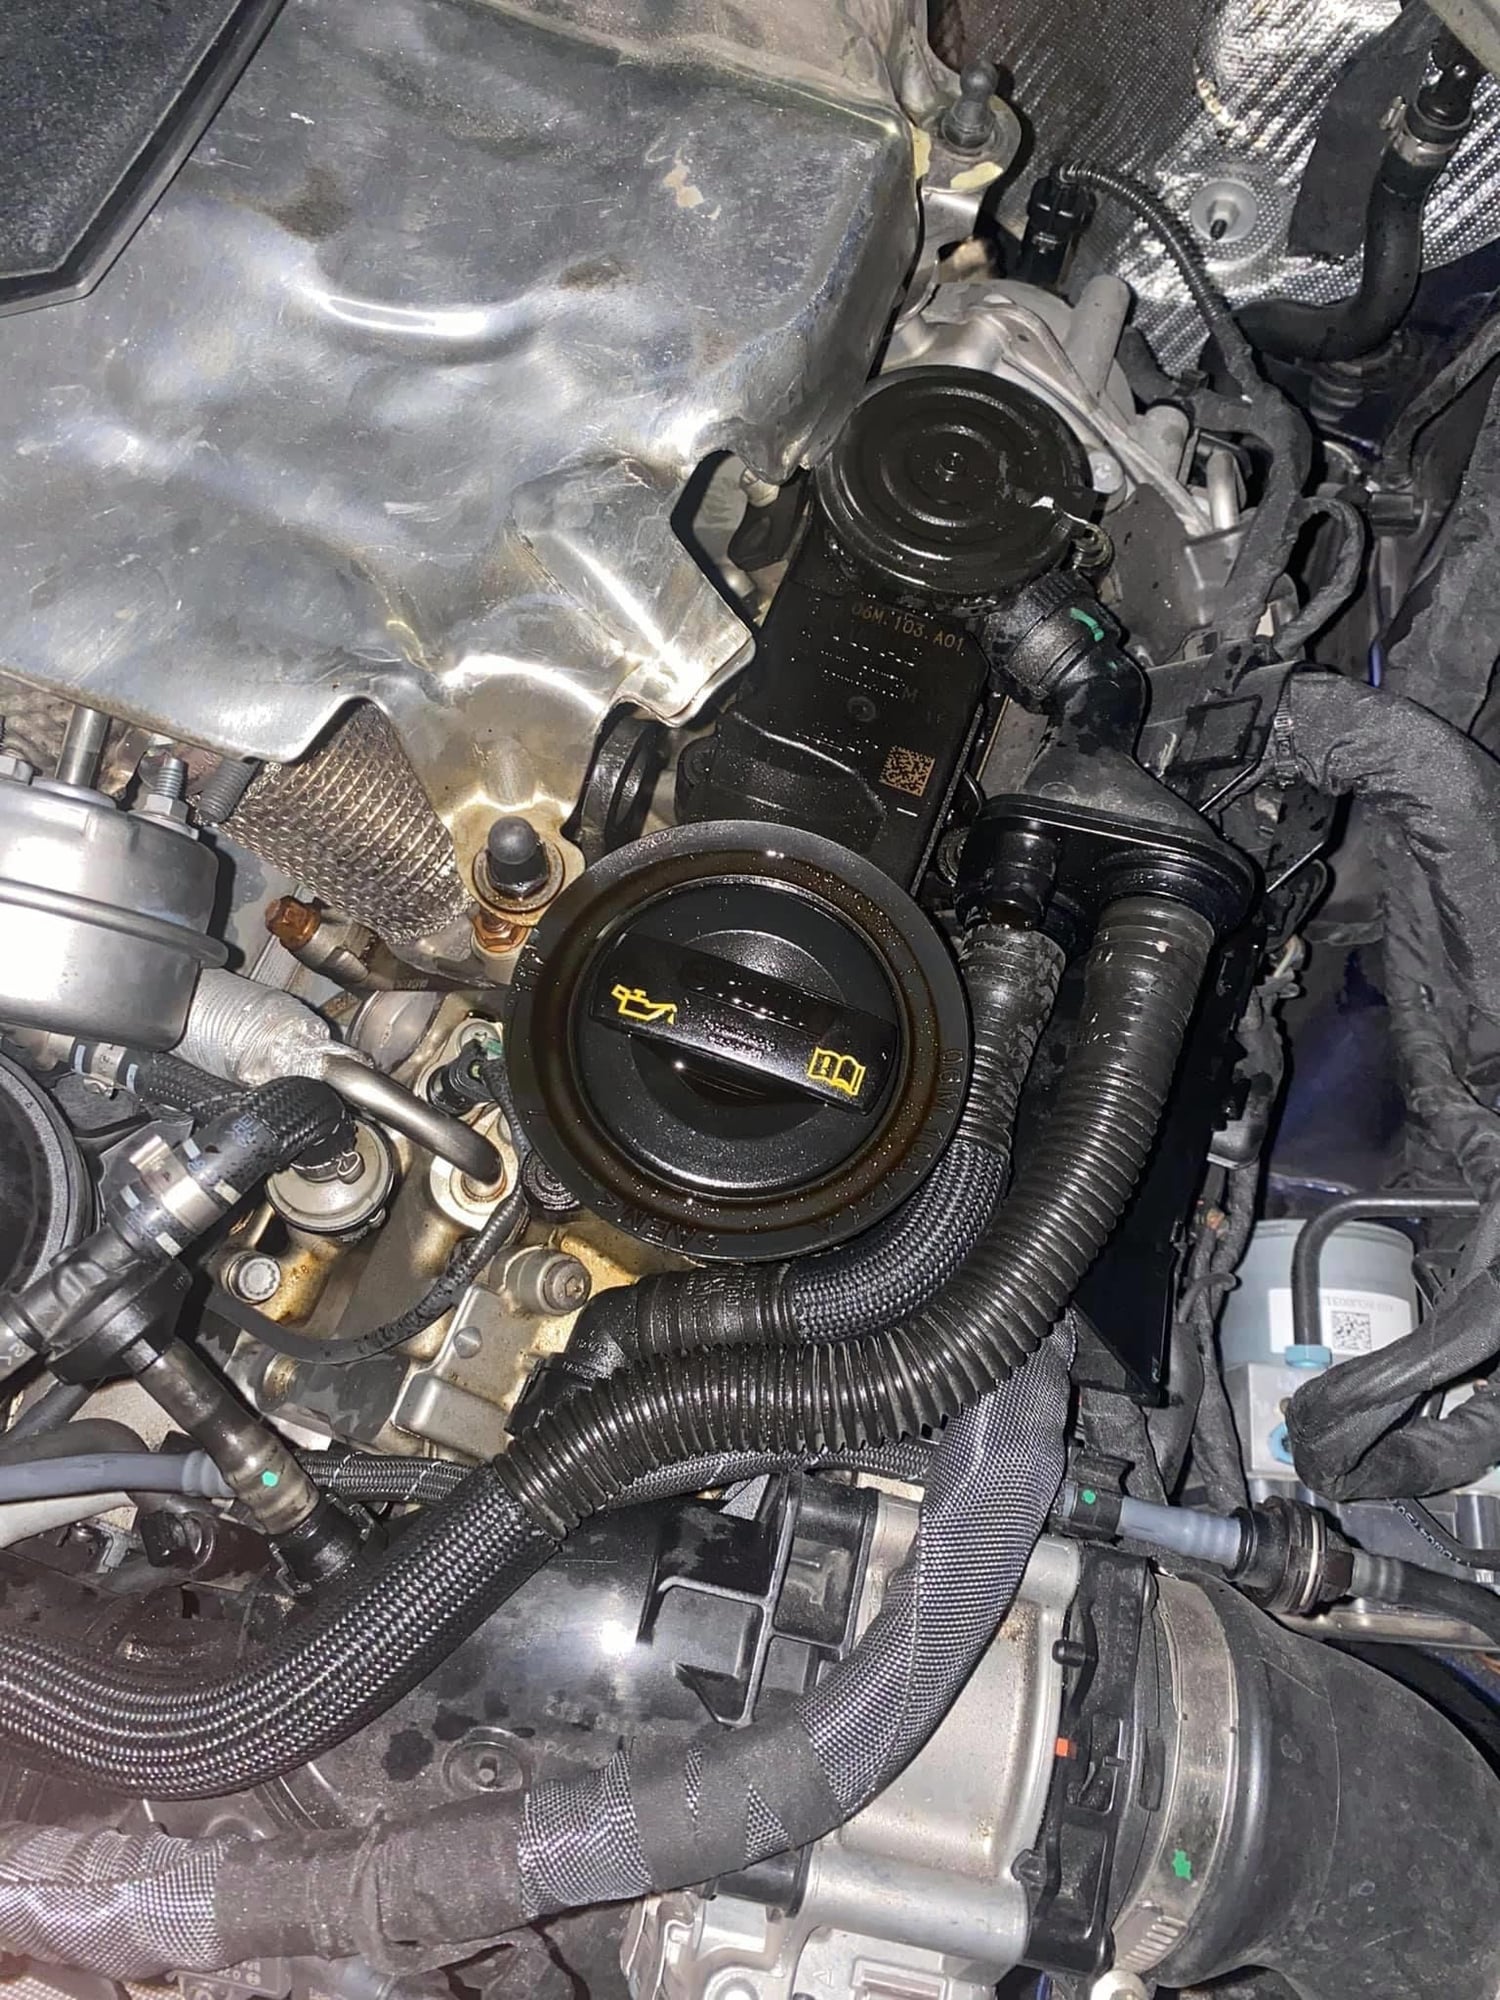 What causes access oil coming out from the breather pipe in a